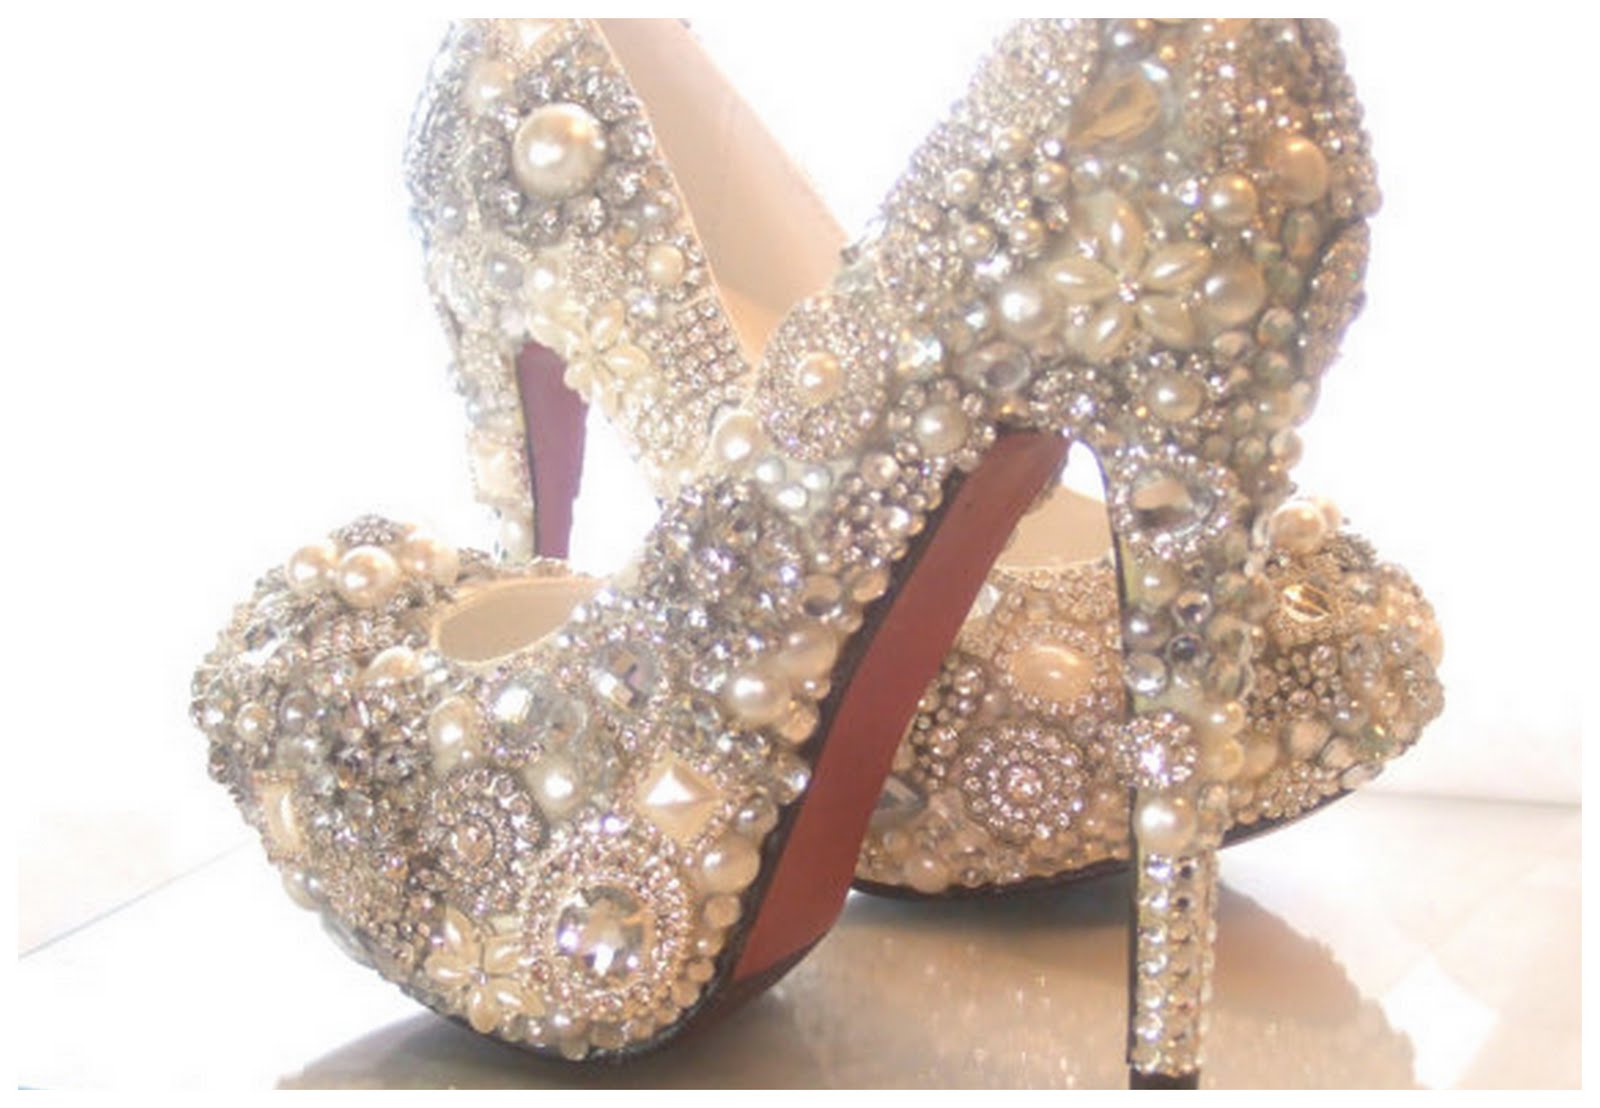 diy wedding cake stands Sparkly_Shoes_Wedding_TLC_Creations_UK_Before_the_Big_Day_Wedding_Blog 